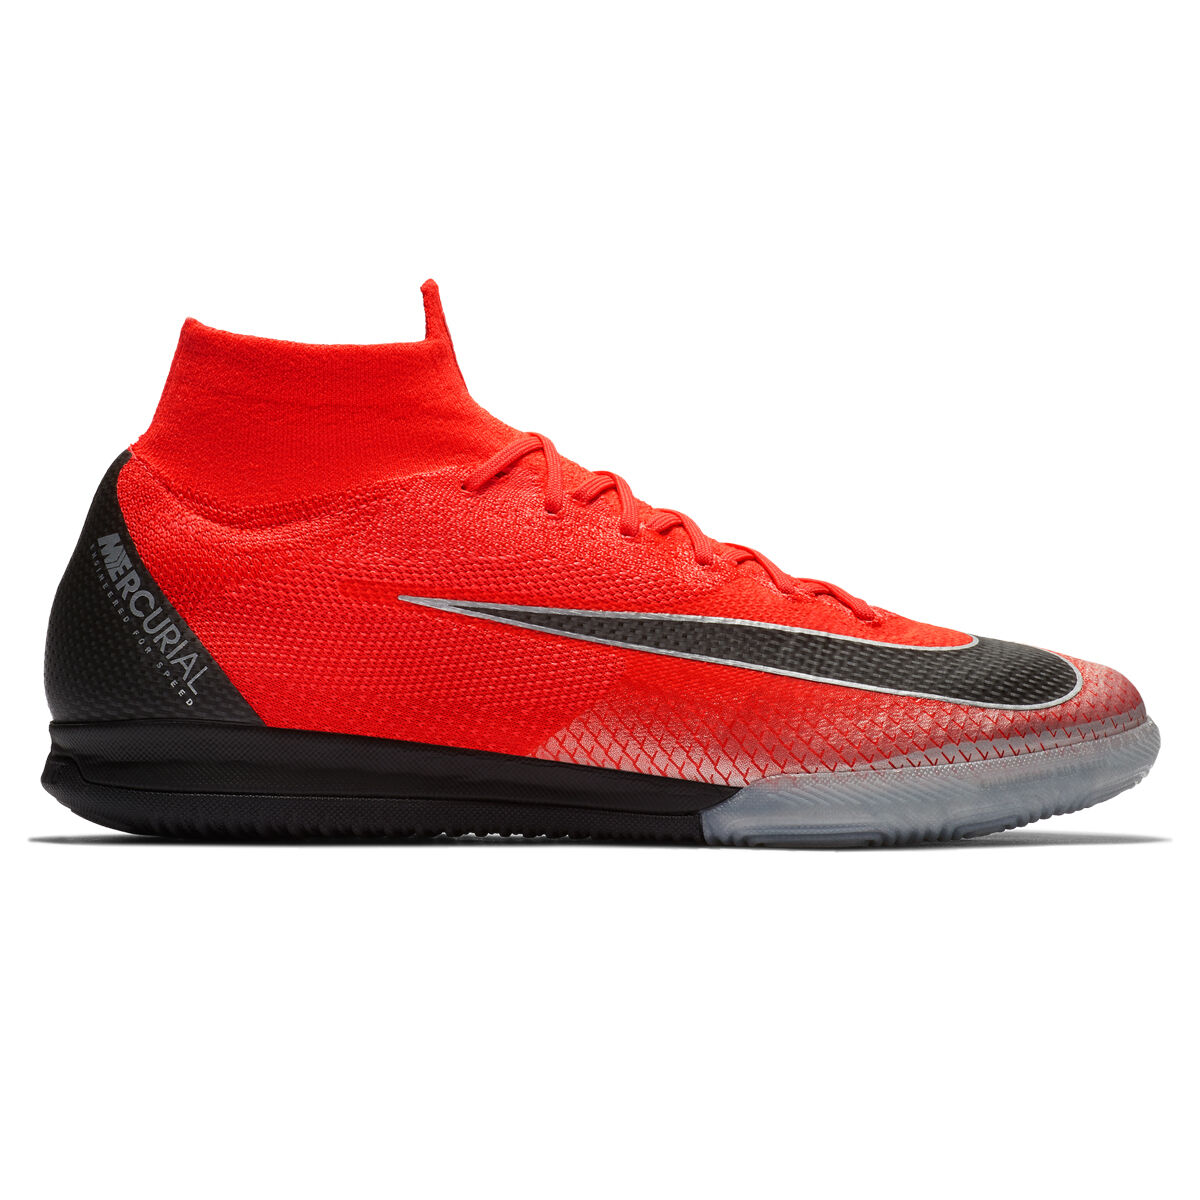 Nike Mercurial Victory V CR7 Astroturf Trainers Silver. Available .